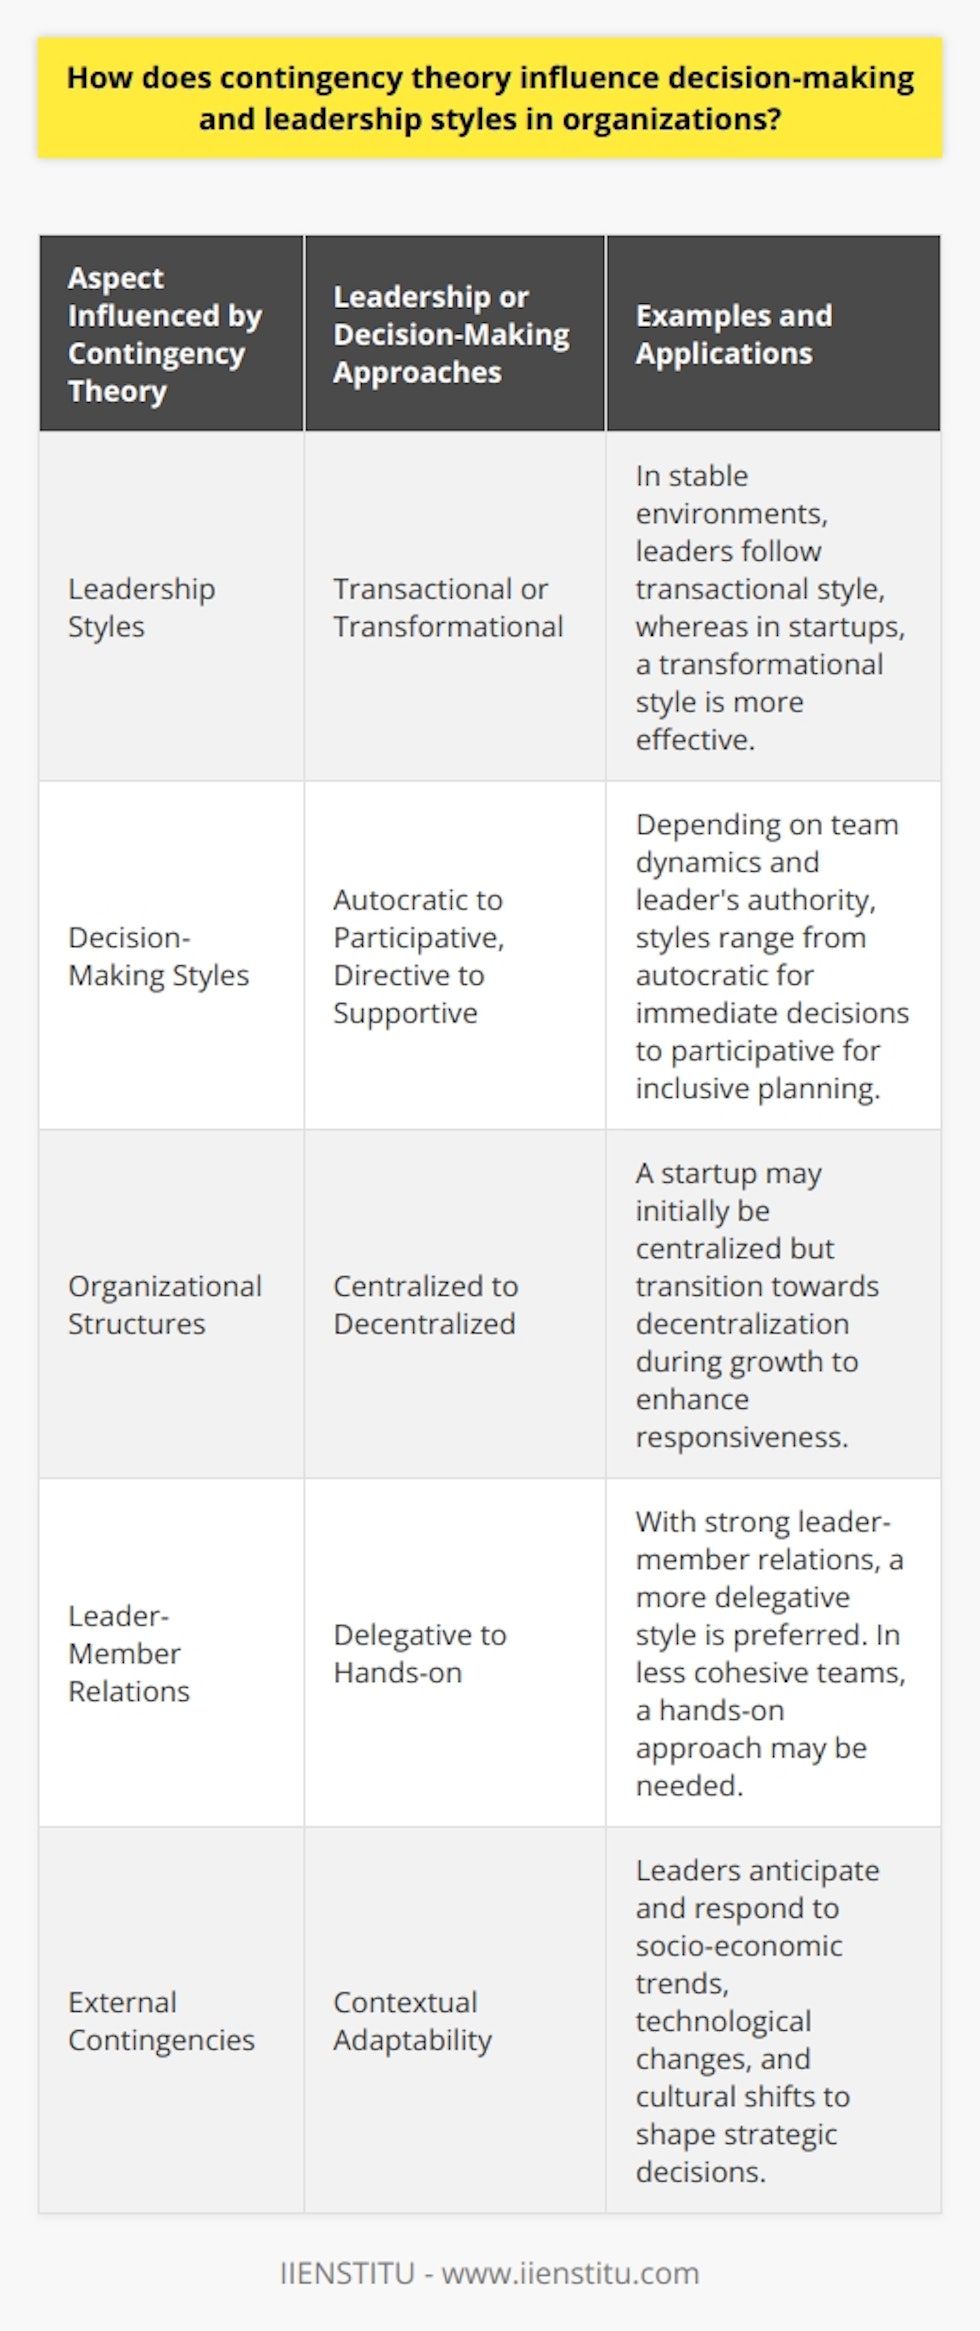 Contingency theory offers a dynamic framework for organizational leadership and decision-making by underscoring the importance of adaptability to the immediate context and environment. It challenges static leadership models and proposes that there is no universally optimal approach that fits all contexts or challenges.The theory suggests an analytical process where leaders must carefully evaluate the unique aspects of each situation: this includes team dynamics, resource availability, the nature of the task at hand, and external pressures such as market conditions or regulatory environments. The key lies in identifying the critical variables that define each unique situation and acting in a manner that aligns with those variables.For instance, in a highly routine and stable environment, a leader might opt for a more transactional leadership style, where rules, procedures, and standards are paramount. In contrast, in a dynamic, uncertain environment—a startup, for example—a transformational leadership approach, involving inspiration, innovation, and risk-taking, might be more effective. Thus, depending on the task, relationship, and position power of leaders, decision-making styles can fluctuate from one end of the spectrum to the other: autocratic or participative, directive or supportive, and so on.Moreover, contingency theory extends beyond mere managerial styles to organizational structures and decision-making processes. For instance, consider an organization that is transitioning from a startup phase to a growth phase. Initially, leadership might be more centralized with decisions being made rapidly at the top to navigate the volatility of the startup world. As the company grows, however, this centralized approach could become less effective. Contingency theory would then advocate a shift towards decentralization, allowing for more responsiveness and autonomy at lower levels of the organization.The contingency approach also throws light on the leader-member relations and task structure. Effective leaders under this theory are the ones who can diagnose these relations and structure and adapt their style to maintain optimal performance. For example, if the leader-member relations are strong, leaders might opt for a more delegative style, trusting their team's ability to manage their responsibilities. Conversely, with a less experienced or cohesive team, a more hands-on style may be required.Contingency theory also recognizes that organizations are systems within broader systems. Thus, leaders must also account for wider socio-economic trends, technological developments, and cultural shifts. The capacity to foresee and adapt to such external contingencies can lead to more strategic and foresightful decision-making.In essence, contingency theory embodies the principle that effective leaders are those who can recognize the contours of their present circumstances and adapt their strategies and methods accordingly. Rather than trying to apply a fixed blueprint for leadership across all scenarios, leaders imbued with the principles of contingency theory are equipped with a mindset of flexibility, ready to pivot their approach based on a nuanced understanding of the specific challenges and opportunities they face.As a reflection of its practicality and theoretical vigor, organizations like IIENSTITU may incorporate contingency theory into their educational and training modules, preparing a new generation of leaders who are well-versed in this adaptive, context-aware mode of leadership and decision-making. Such leaders are not only problem-solvers but are also shapers of organizational cultures that thrive on agility, resilience, and responsiveness to change.